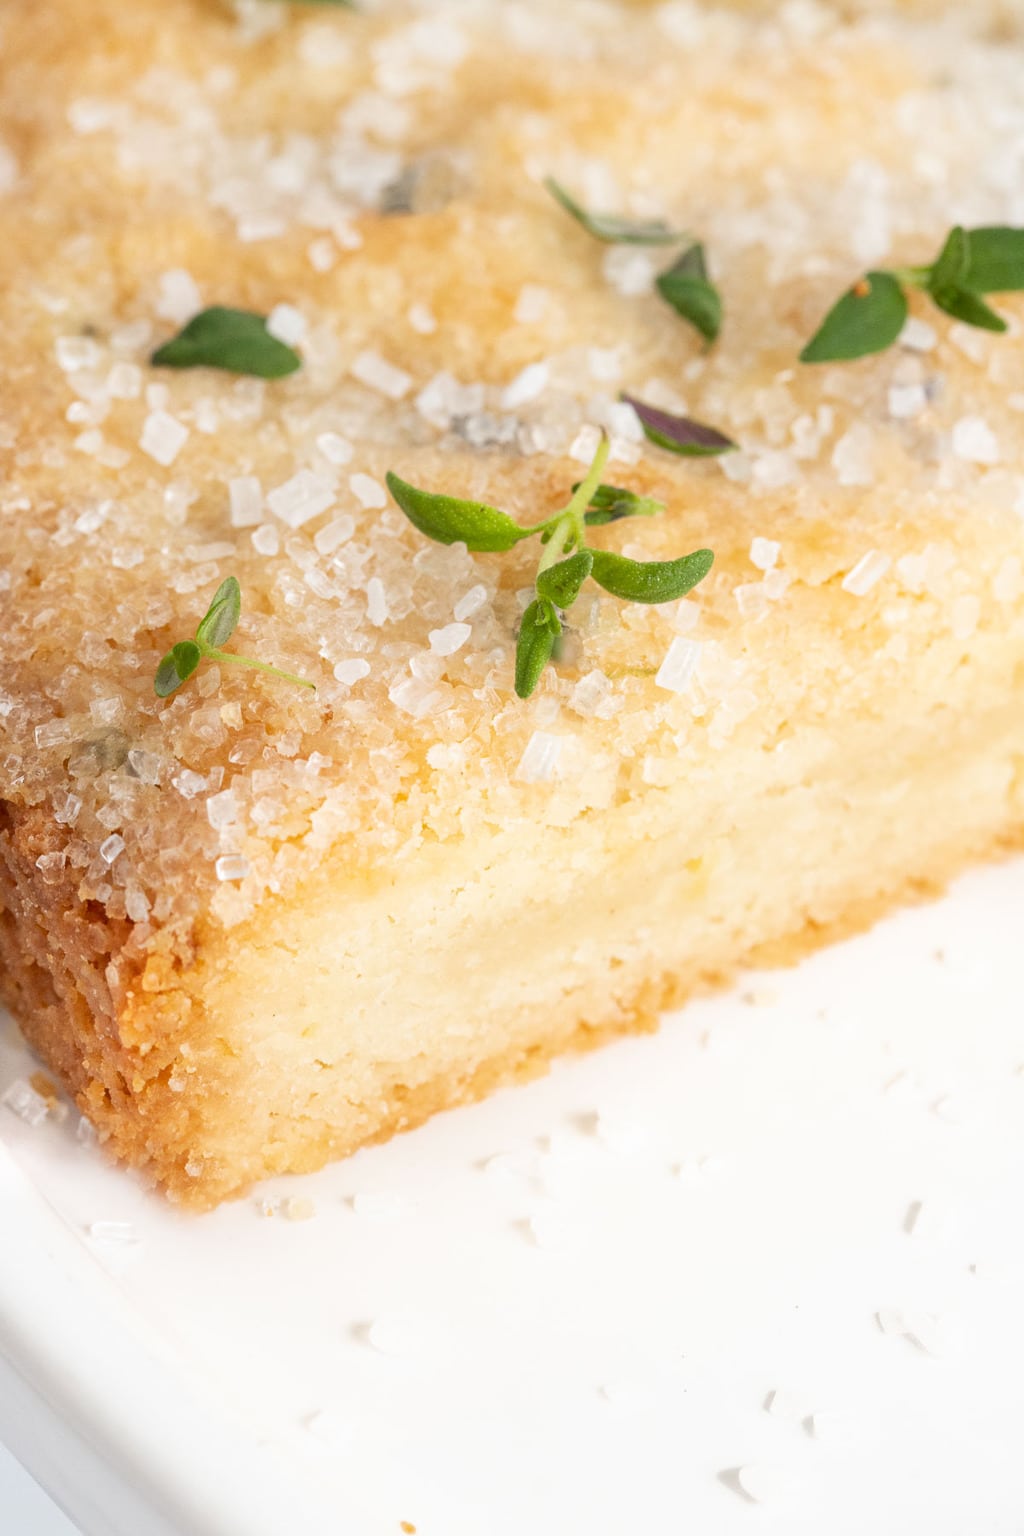 Vertical extreme closeup of the inside and top of Lemon Thyme Shortbread garnished with fresh thyme leaves.